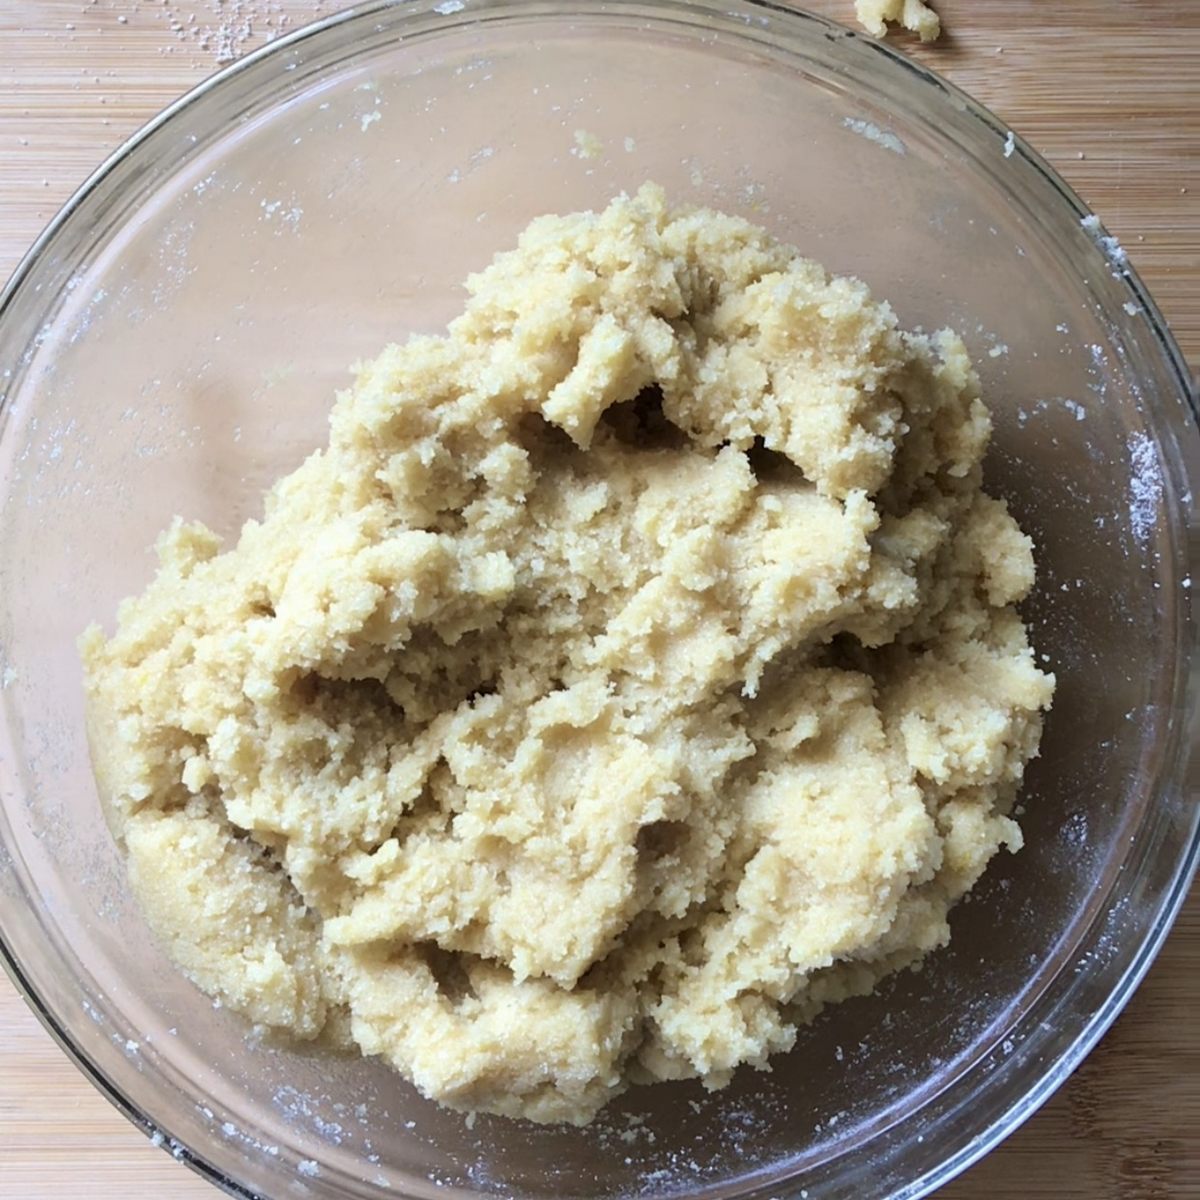 The raw dough to make gluten-free Italian cookies in a large bowl.